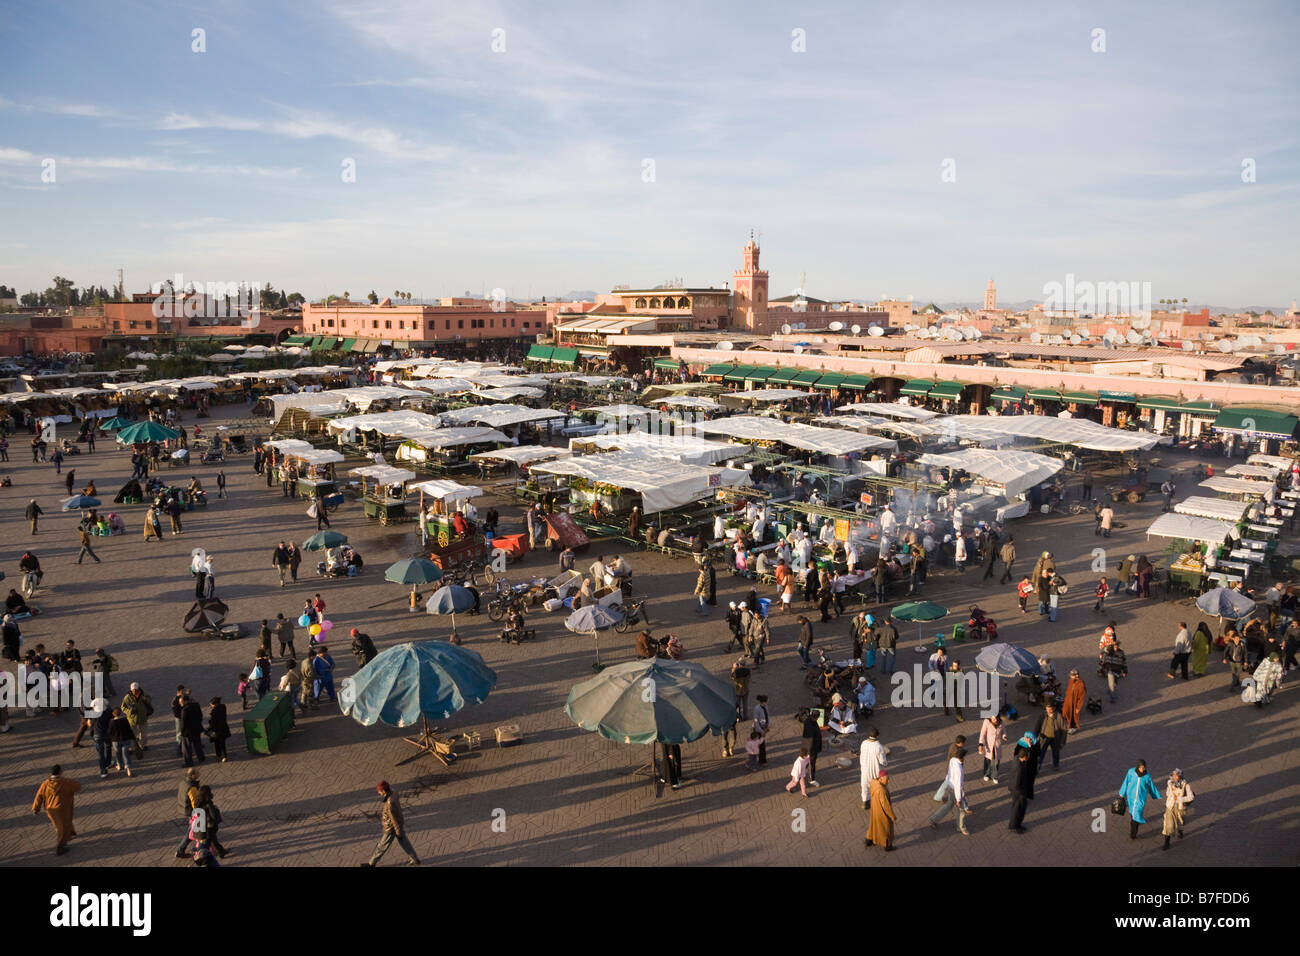 Marrakech Morocco North Africa High view of stalls and people in Place Djemma el Fna square in early evening in the Medina Stock Photo